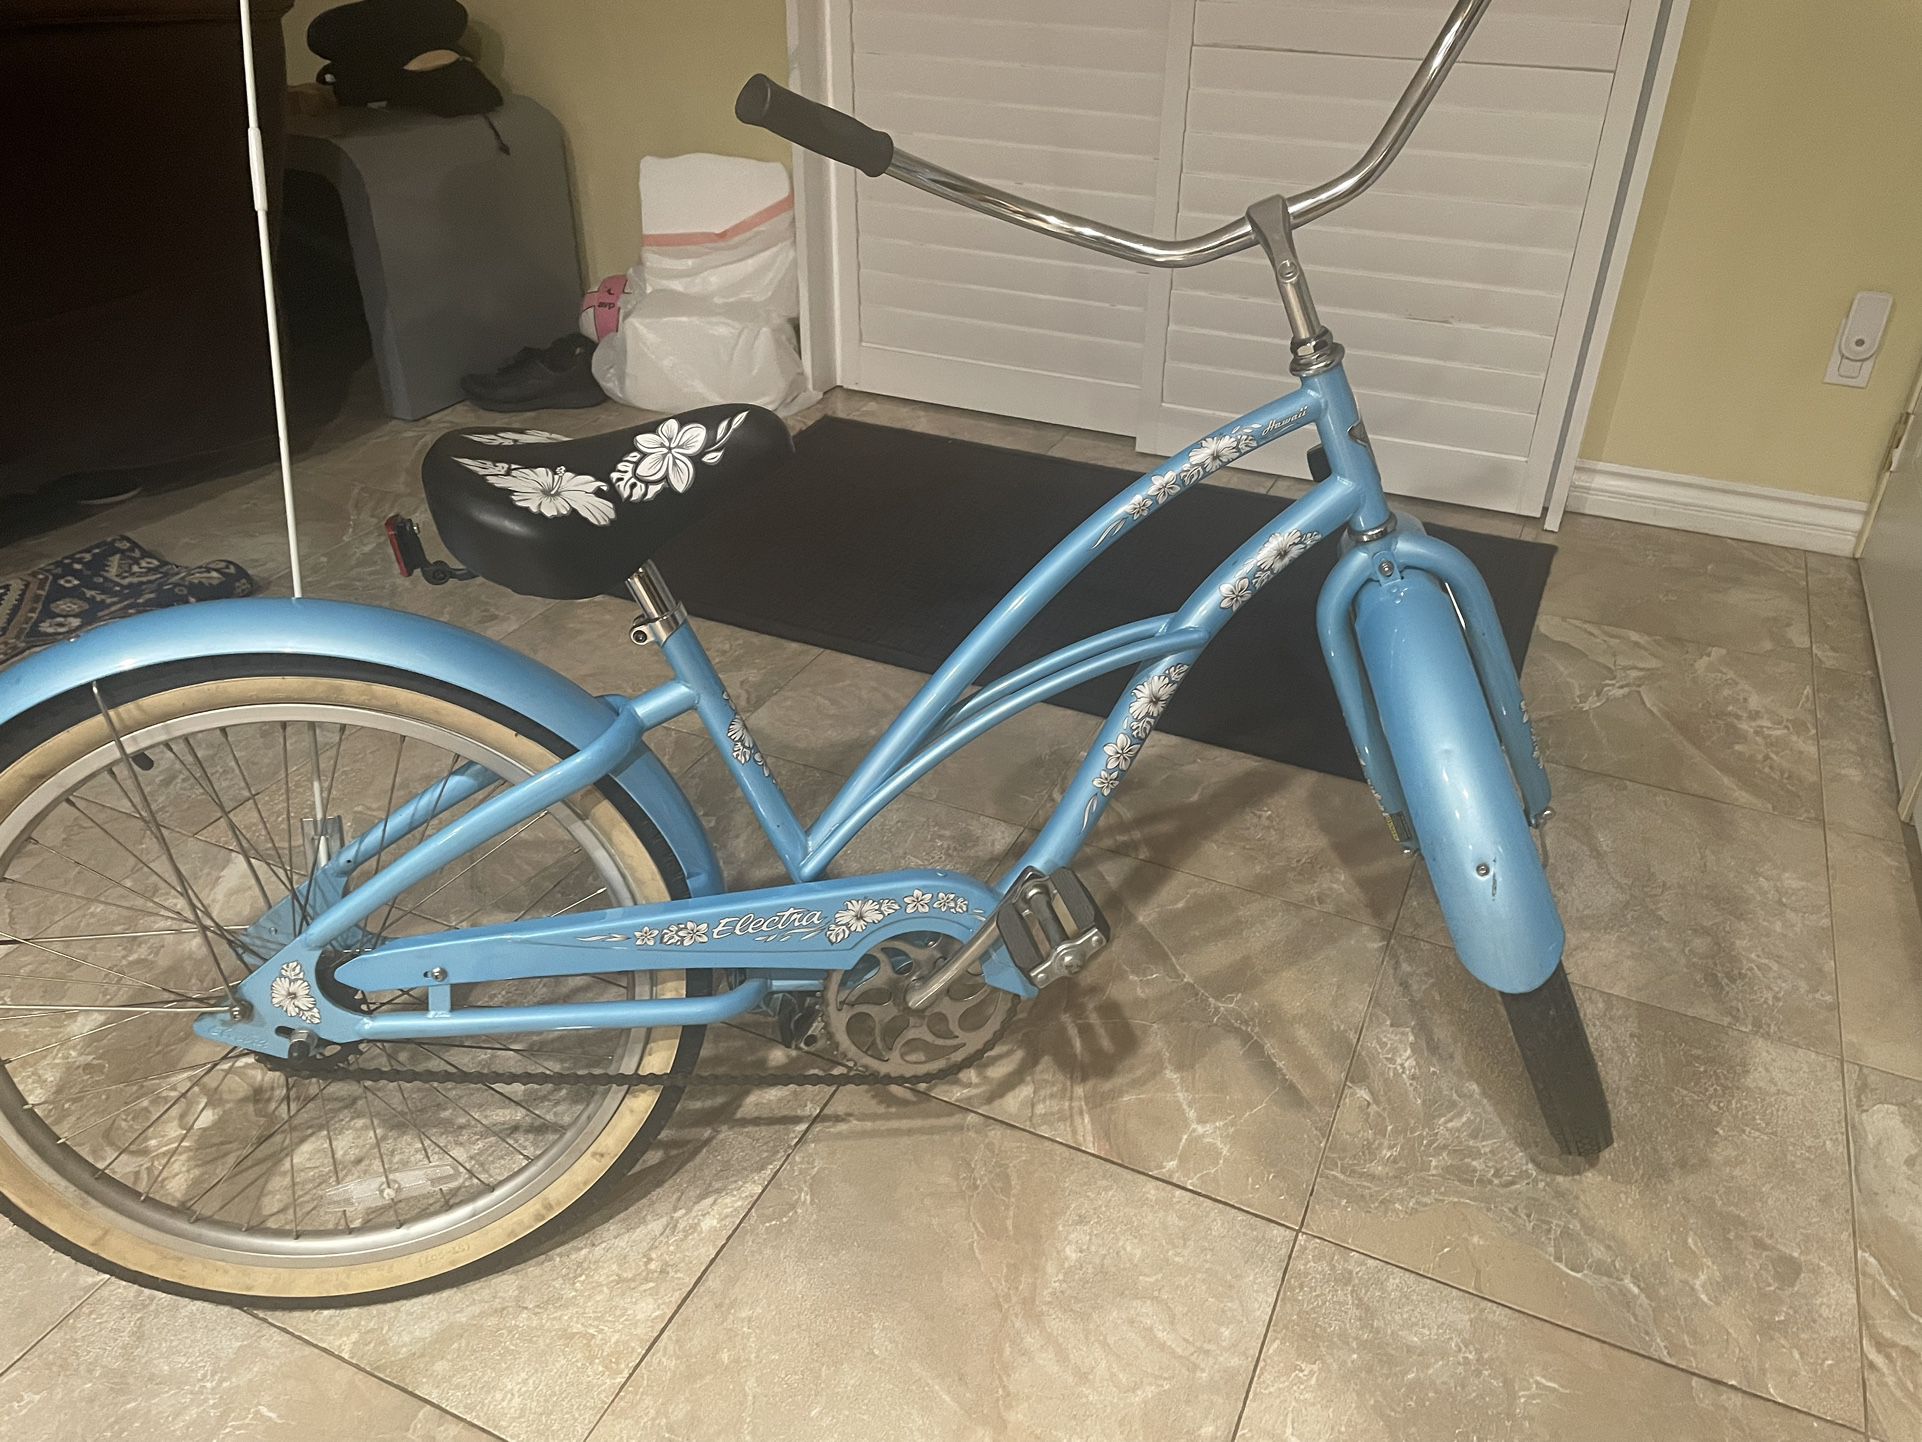 Bike - GREAT CONDITION HARDLY USED